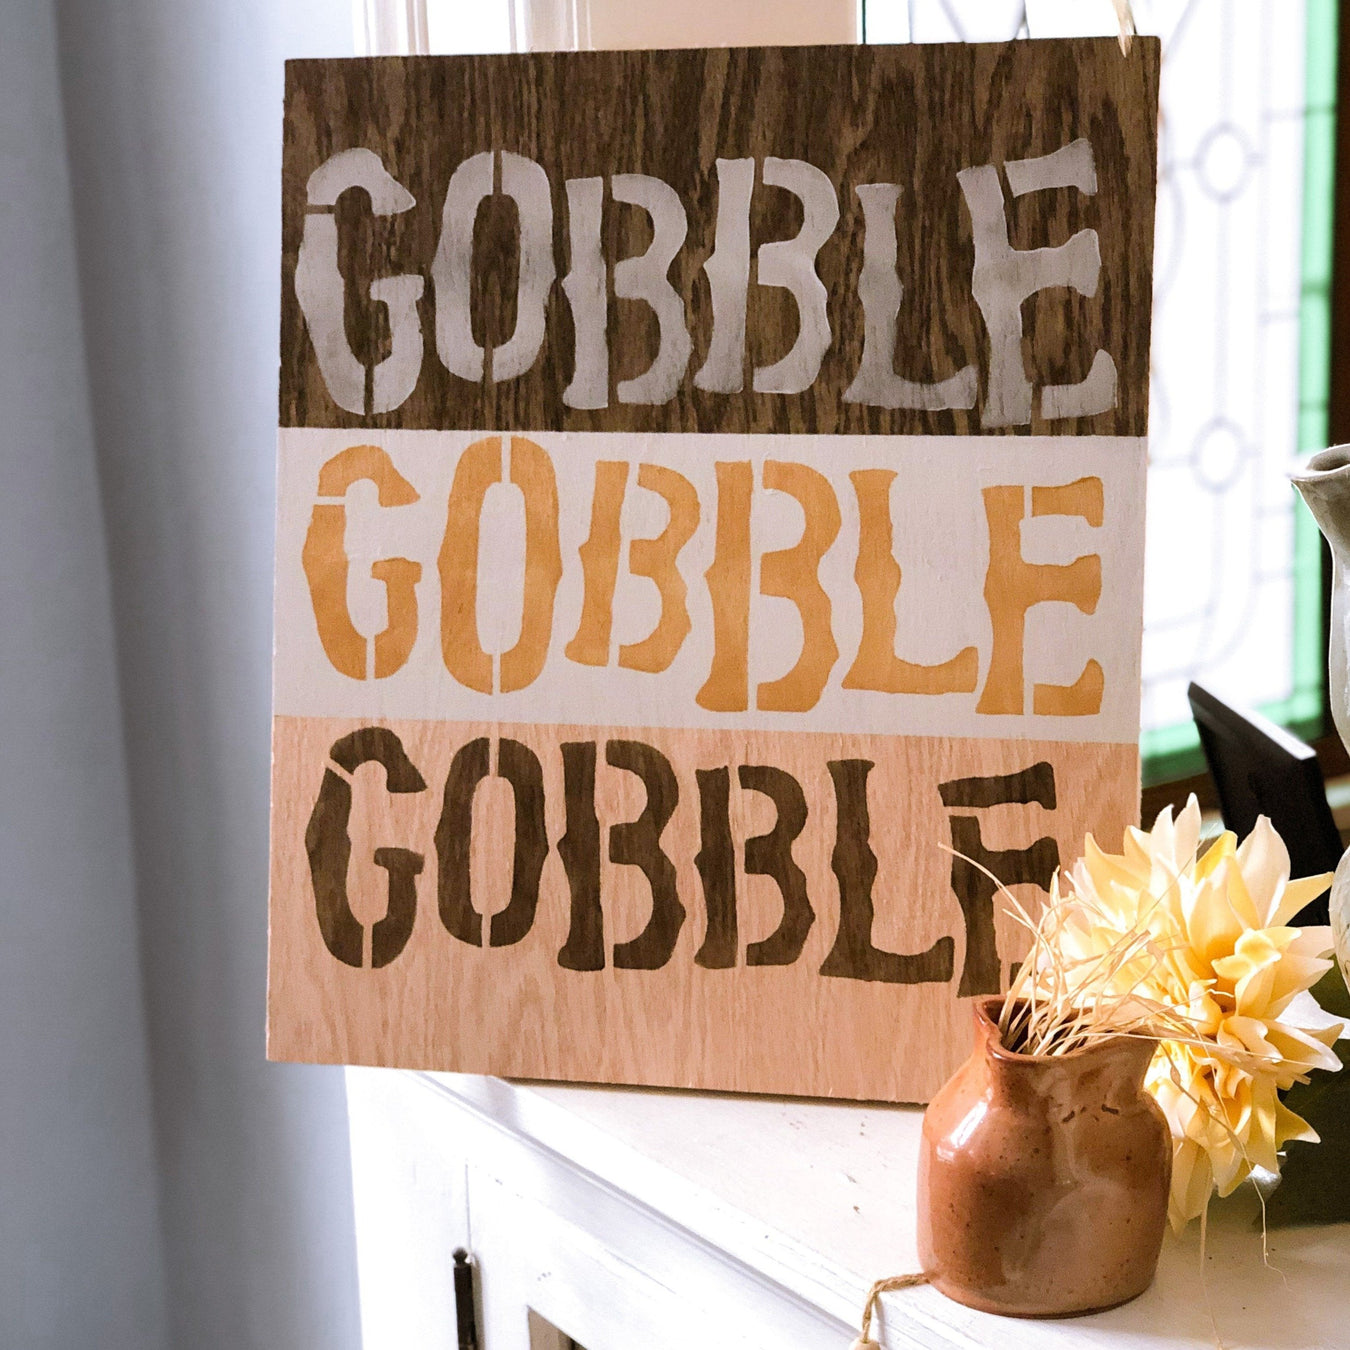 stenciled gobble gobble gobble words painted on wood as thanksgiving decor